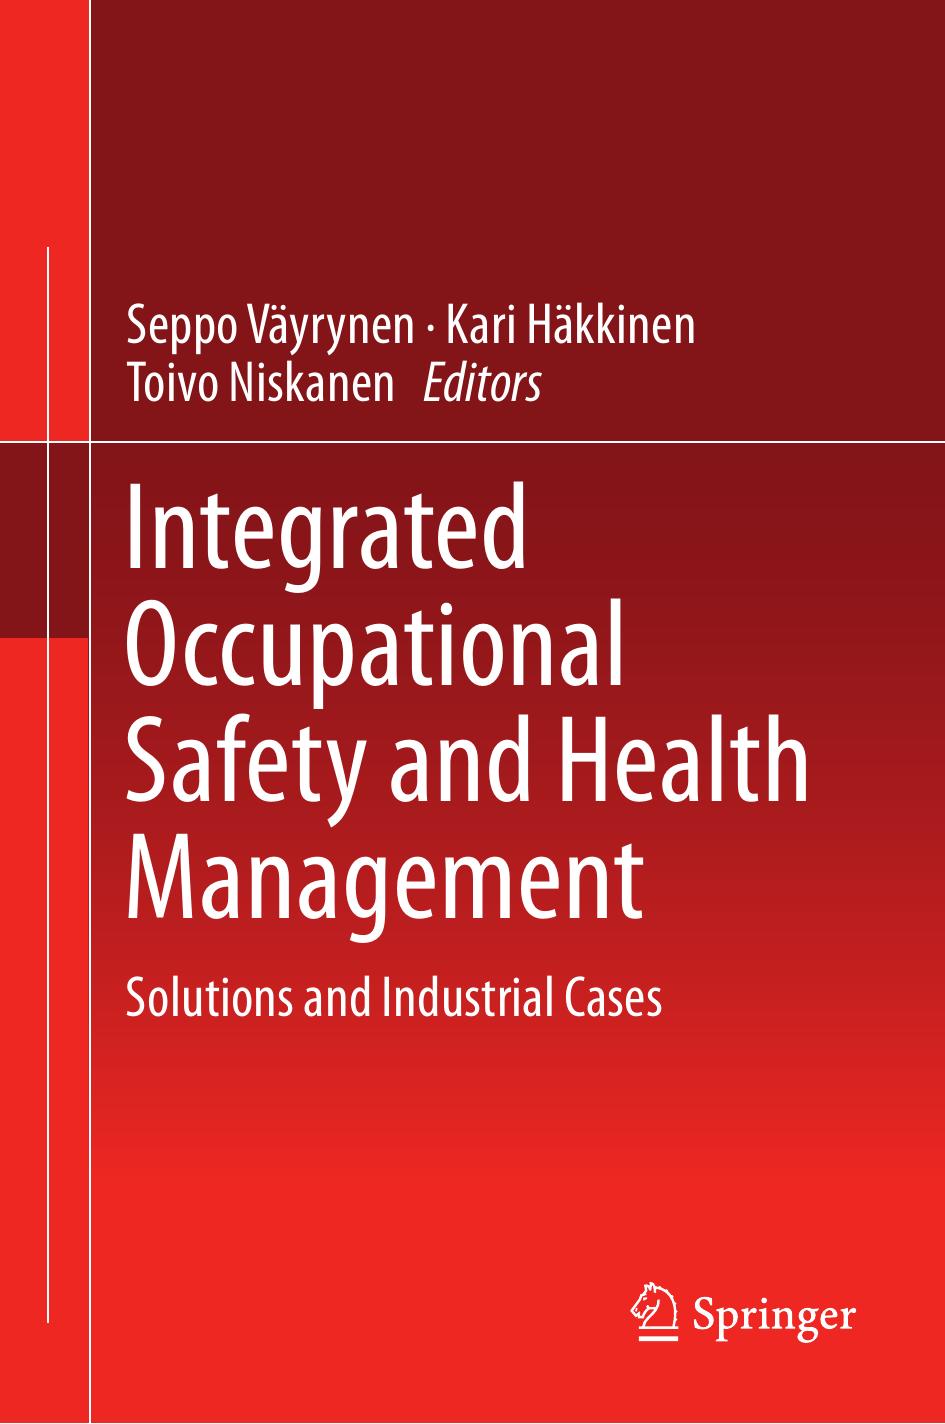 Integrated Occupational Safety and Health Management  Solutions and Industrial Cases (2015)